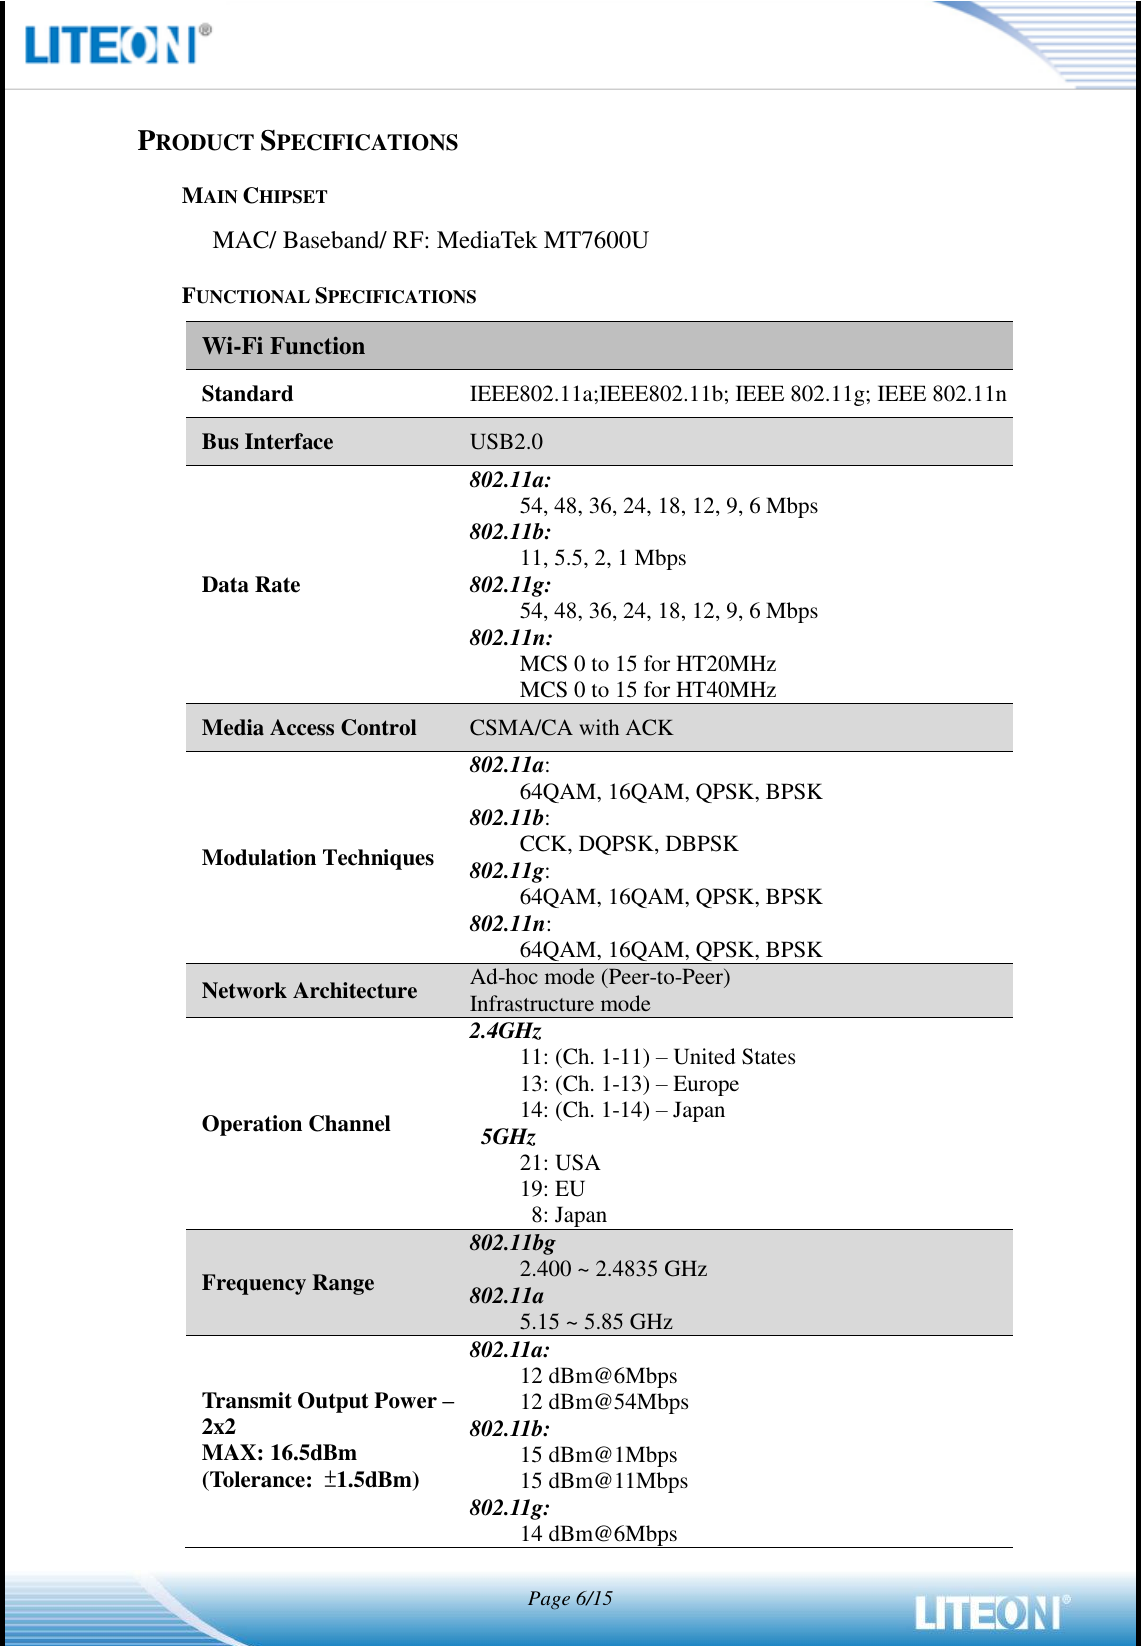   Page 6/15   PRODUCT SPECIFICATIONS MAIN CHIPSET MAC/ Baseband/ RF: MediaTek MT7600U FUNCTIONAL SPECIFICATIONS Wi-Fi Function Standard IEEE802.11a;IEEE802.11b; IEEE 802.11g; IEEE 802.11n Bus Interface USB2.0 Data Rate 802.11a: 54, 48, 36, 24, 18, 12, 9, 6 Mbps 802.11b: 11, 5.5, 2, 1 Mbps 802.11g: 54, 48, 36, 24, 18, 12, 9, 6 Mbps 802.11n: MCS 0 to 15 for HT20MHz MCS 0 to 15 for HT40MHz Media Access Control CSMA/CA with ACK Modulation Techniques 802.11a: 64QAM, 16QAM, QPSK, BPSK 802.11b: CCK, DQPSK, DBPSK 802.11g: 64QAM, 16QAM, QPSK, BPSK 802.11n: 64QAM, 16QAM, QPSK, BPSK Network Architecture Ad-hoc mode (Peer-to-Peer) Infrastructure mode Operation Channel 2.4GHz 11: (Ch. 1-11) – United States 13: (Ch. 1-13) – Europe 14: (Ch. 1-14) – Japan 5GHz 21: USA 19: EU   8: Japan Frequency Range 802.11bg 2.400 ~ 2.4835 GHz 802.11a 5.15 ~ 5.85 GHz Transmit Output Power – 2x2 MAX: 16.5dBm (Tolerance:  ±1.5dBm) 802.11a: 12 dBm@6Mbps 12 dBm@54Mbps 802.11b: 15 dBm@1Mbps 15 dBm@11Mbps 802.11g: 14 dBm@6Mbps 